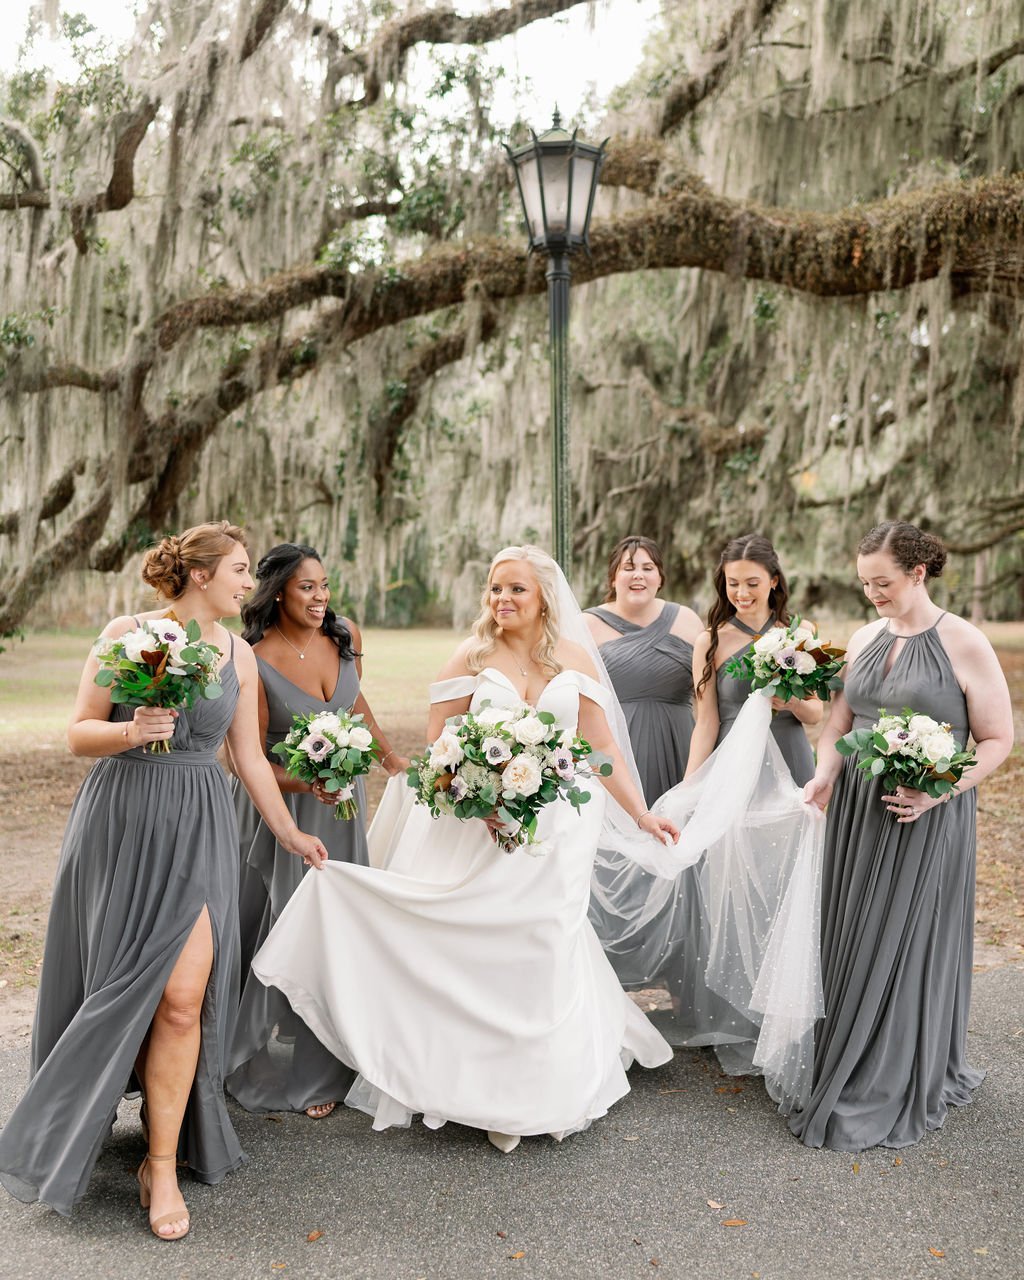 Rachel-and-matthews-elegant-savannah-wedding-at-whitefield-chapel-and-vics-on-the-river-featuring-ivory-and-beau-florals-planned-by-savannah-wedding-planner-ivory-and-beau-savannah-florist-savannah-wedding-florist-savannah-wedding-15.jpg